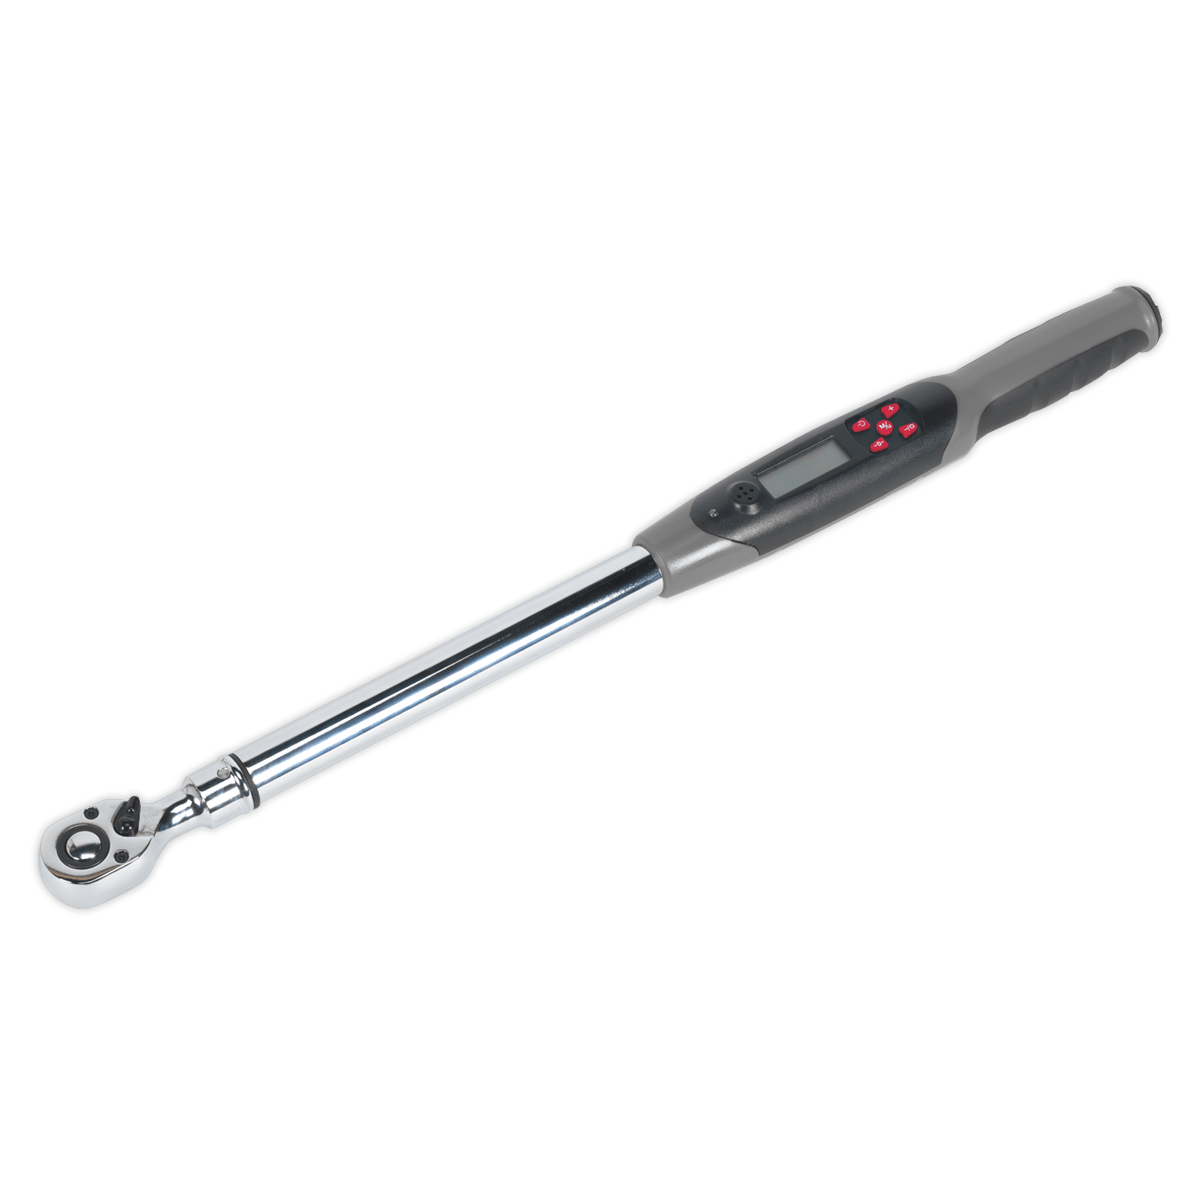 Angle Torque Wrench Digital 1/2"Sq Drive 20-200Nm(14.7-147.5lb.ft) | Rugged and resilient digital torque wrench suitable for workshop and factory use. | toolforce.ie